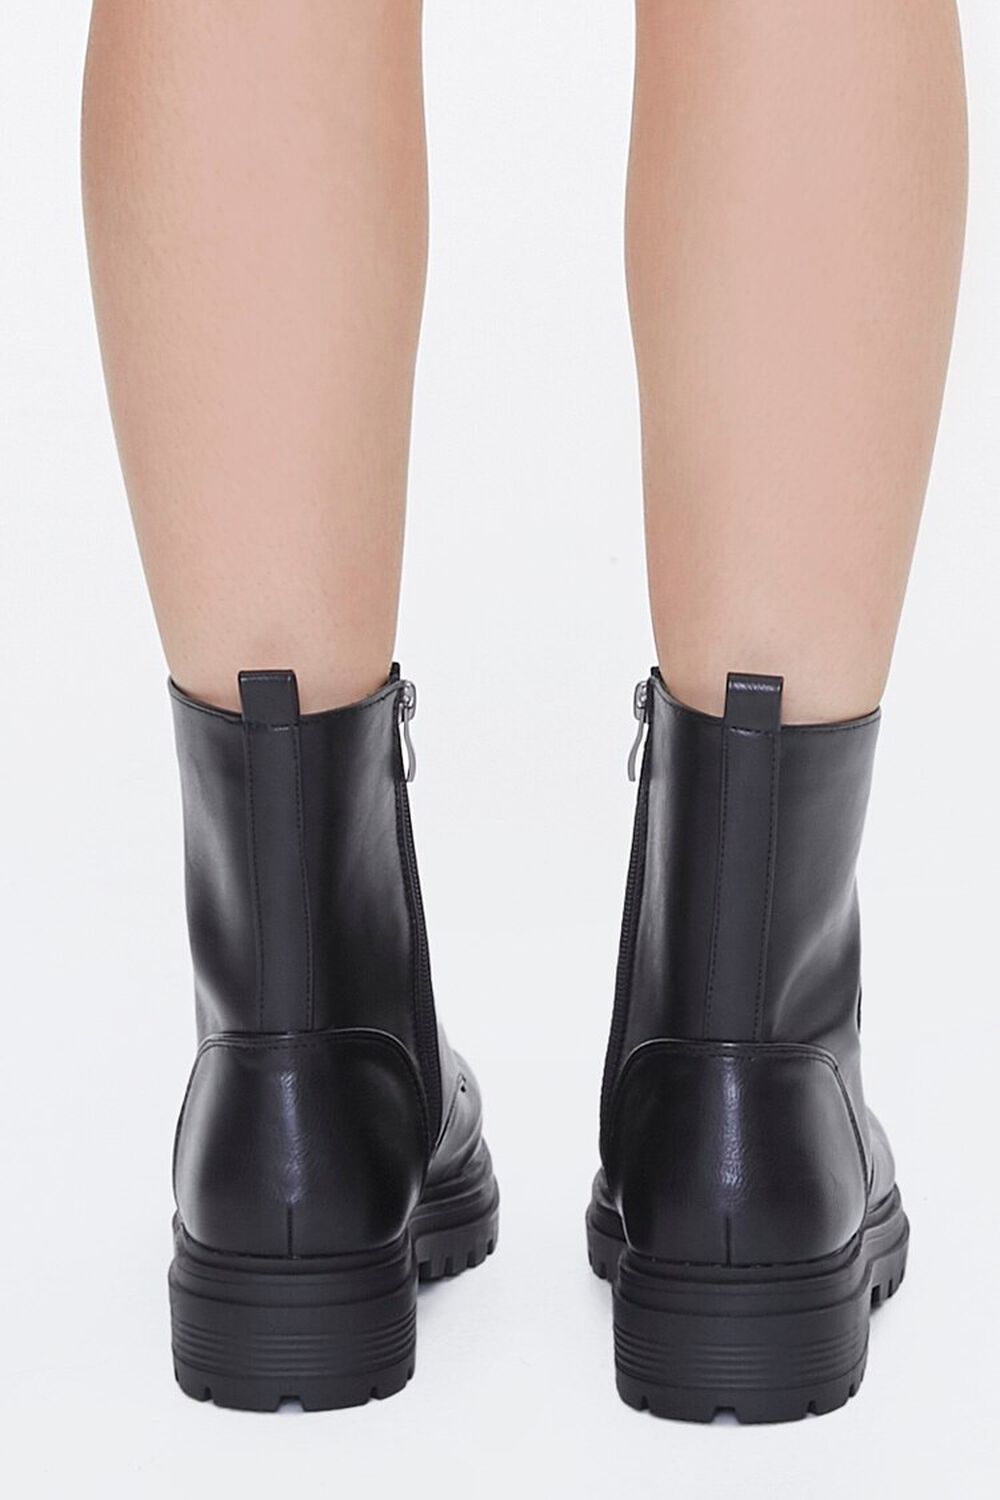 BLACK Faux Leather Lace-Up Ankle Boots, image 3